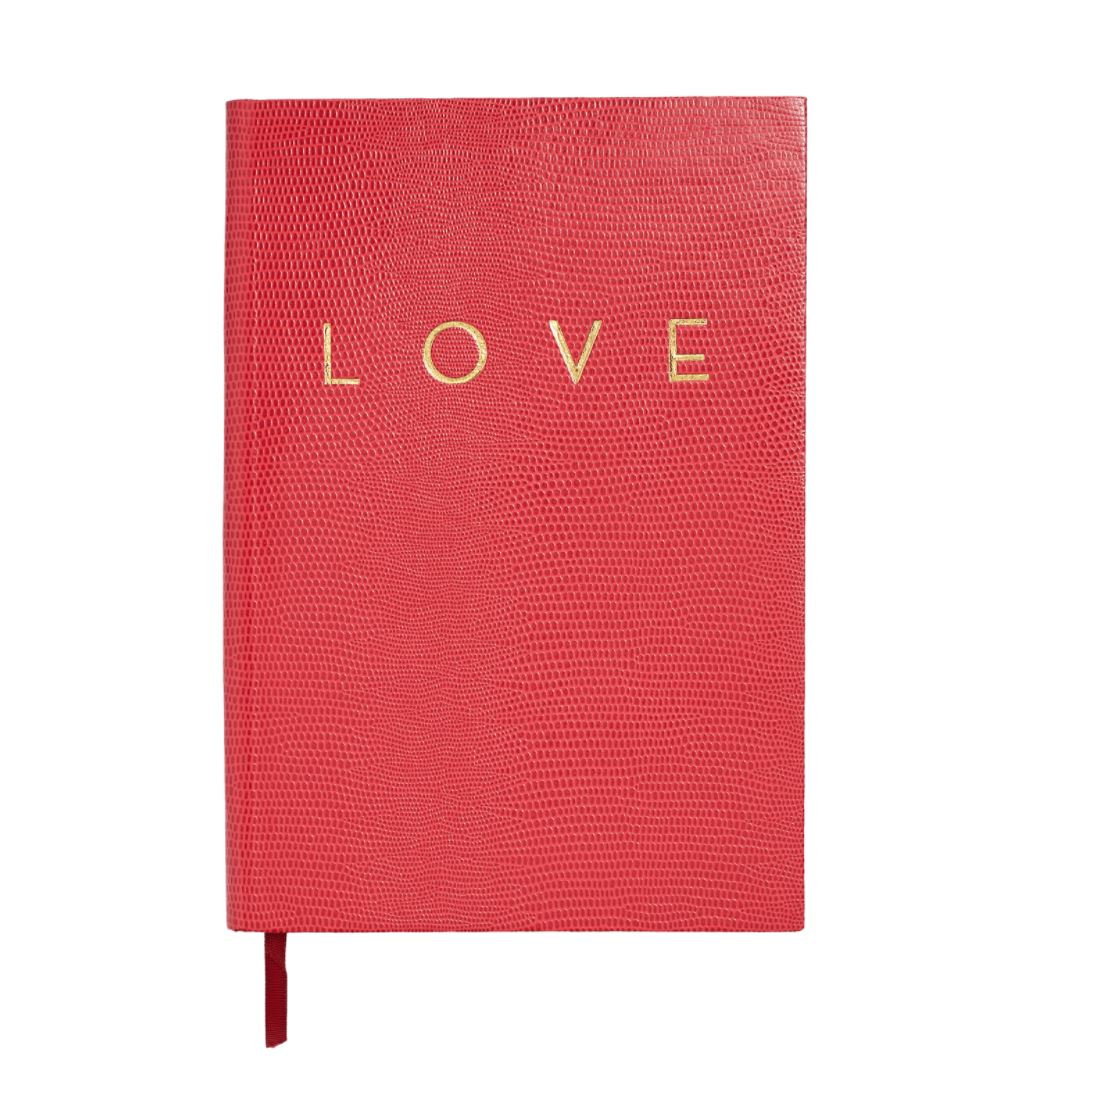 Love Journal Journals Sloane Stationery Red 